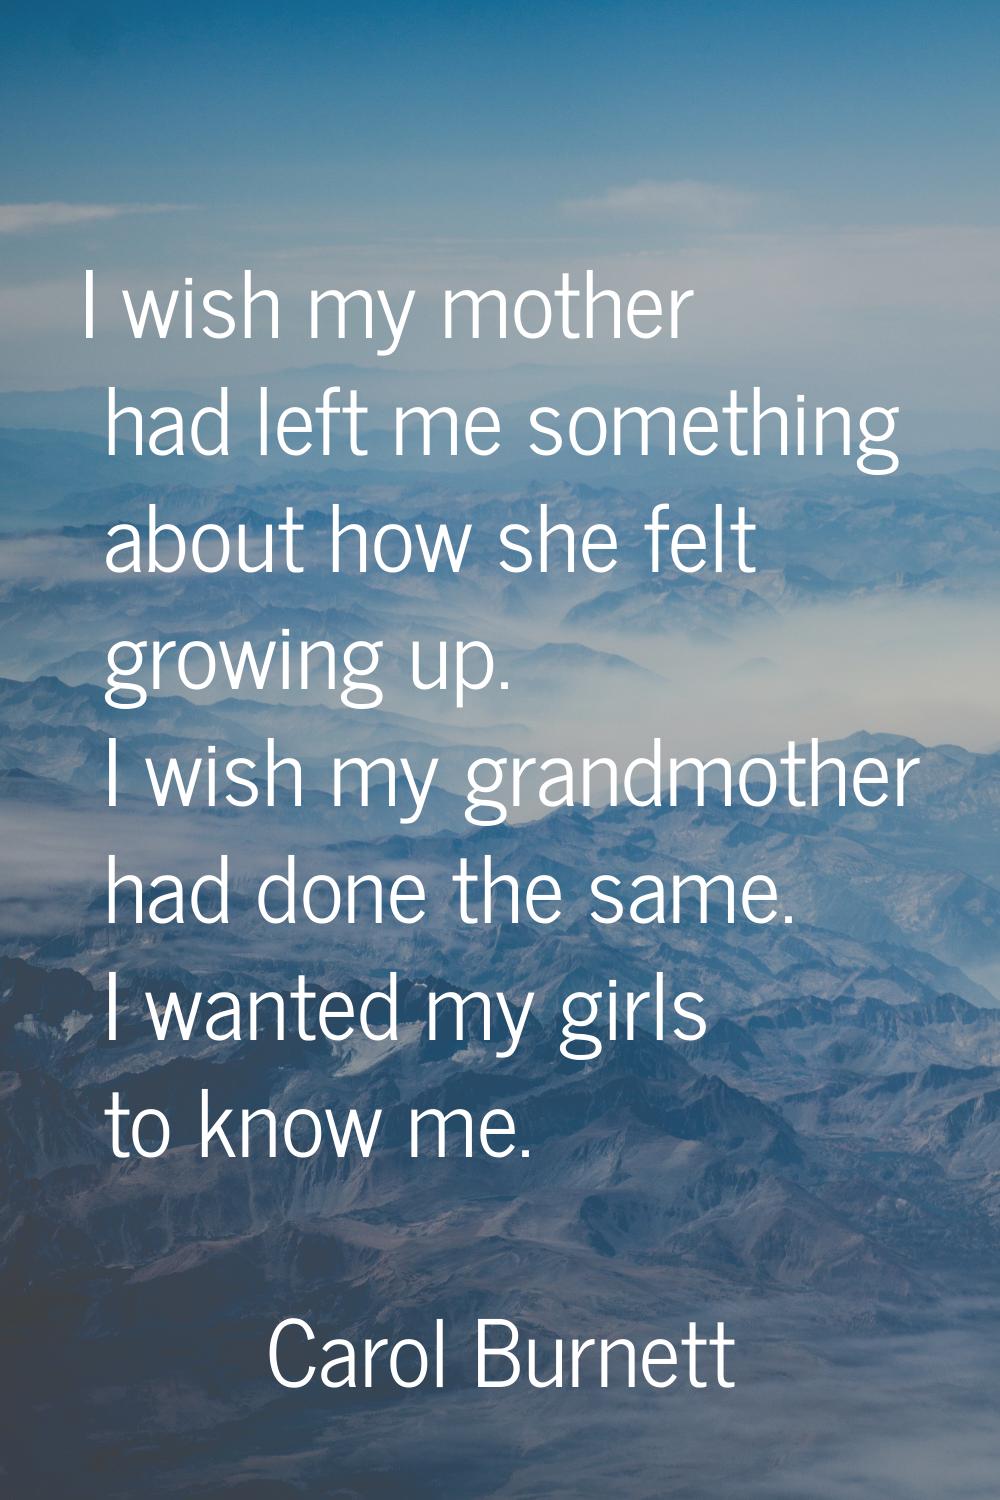 I wish my mother had left me something about how she felt growing up. I wish my grandmother had don